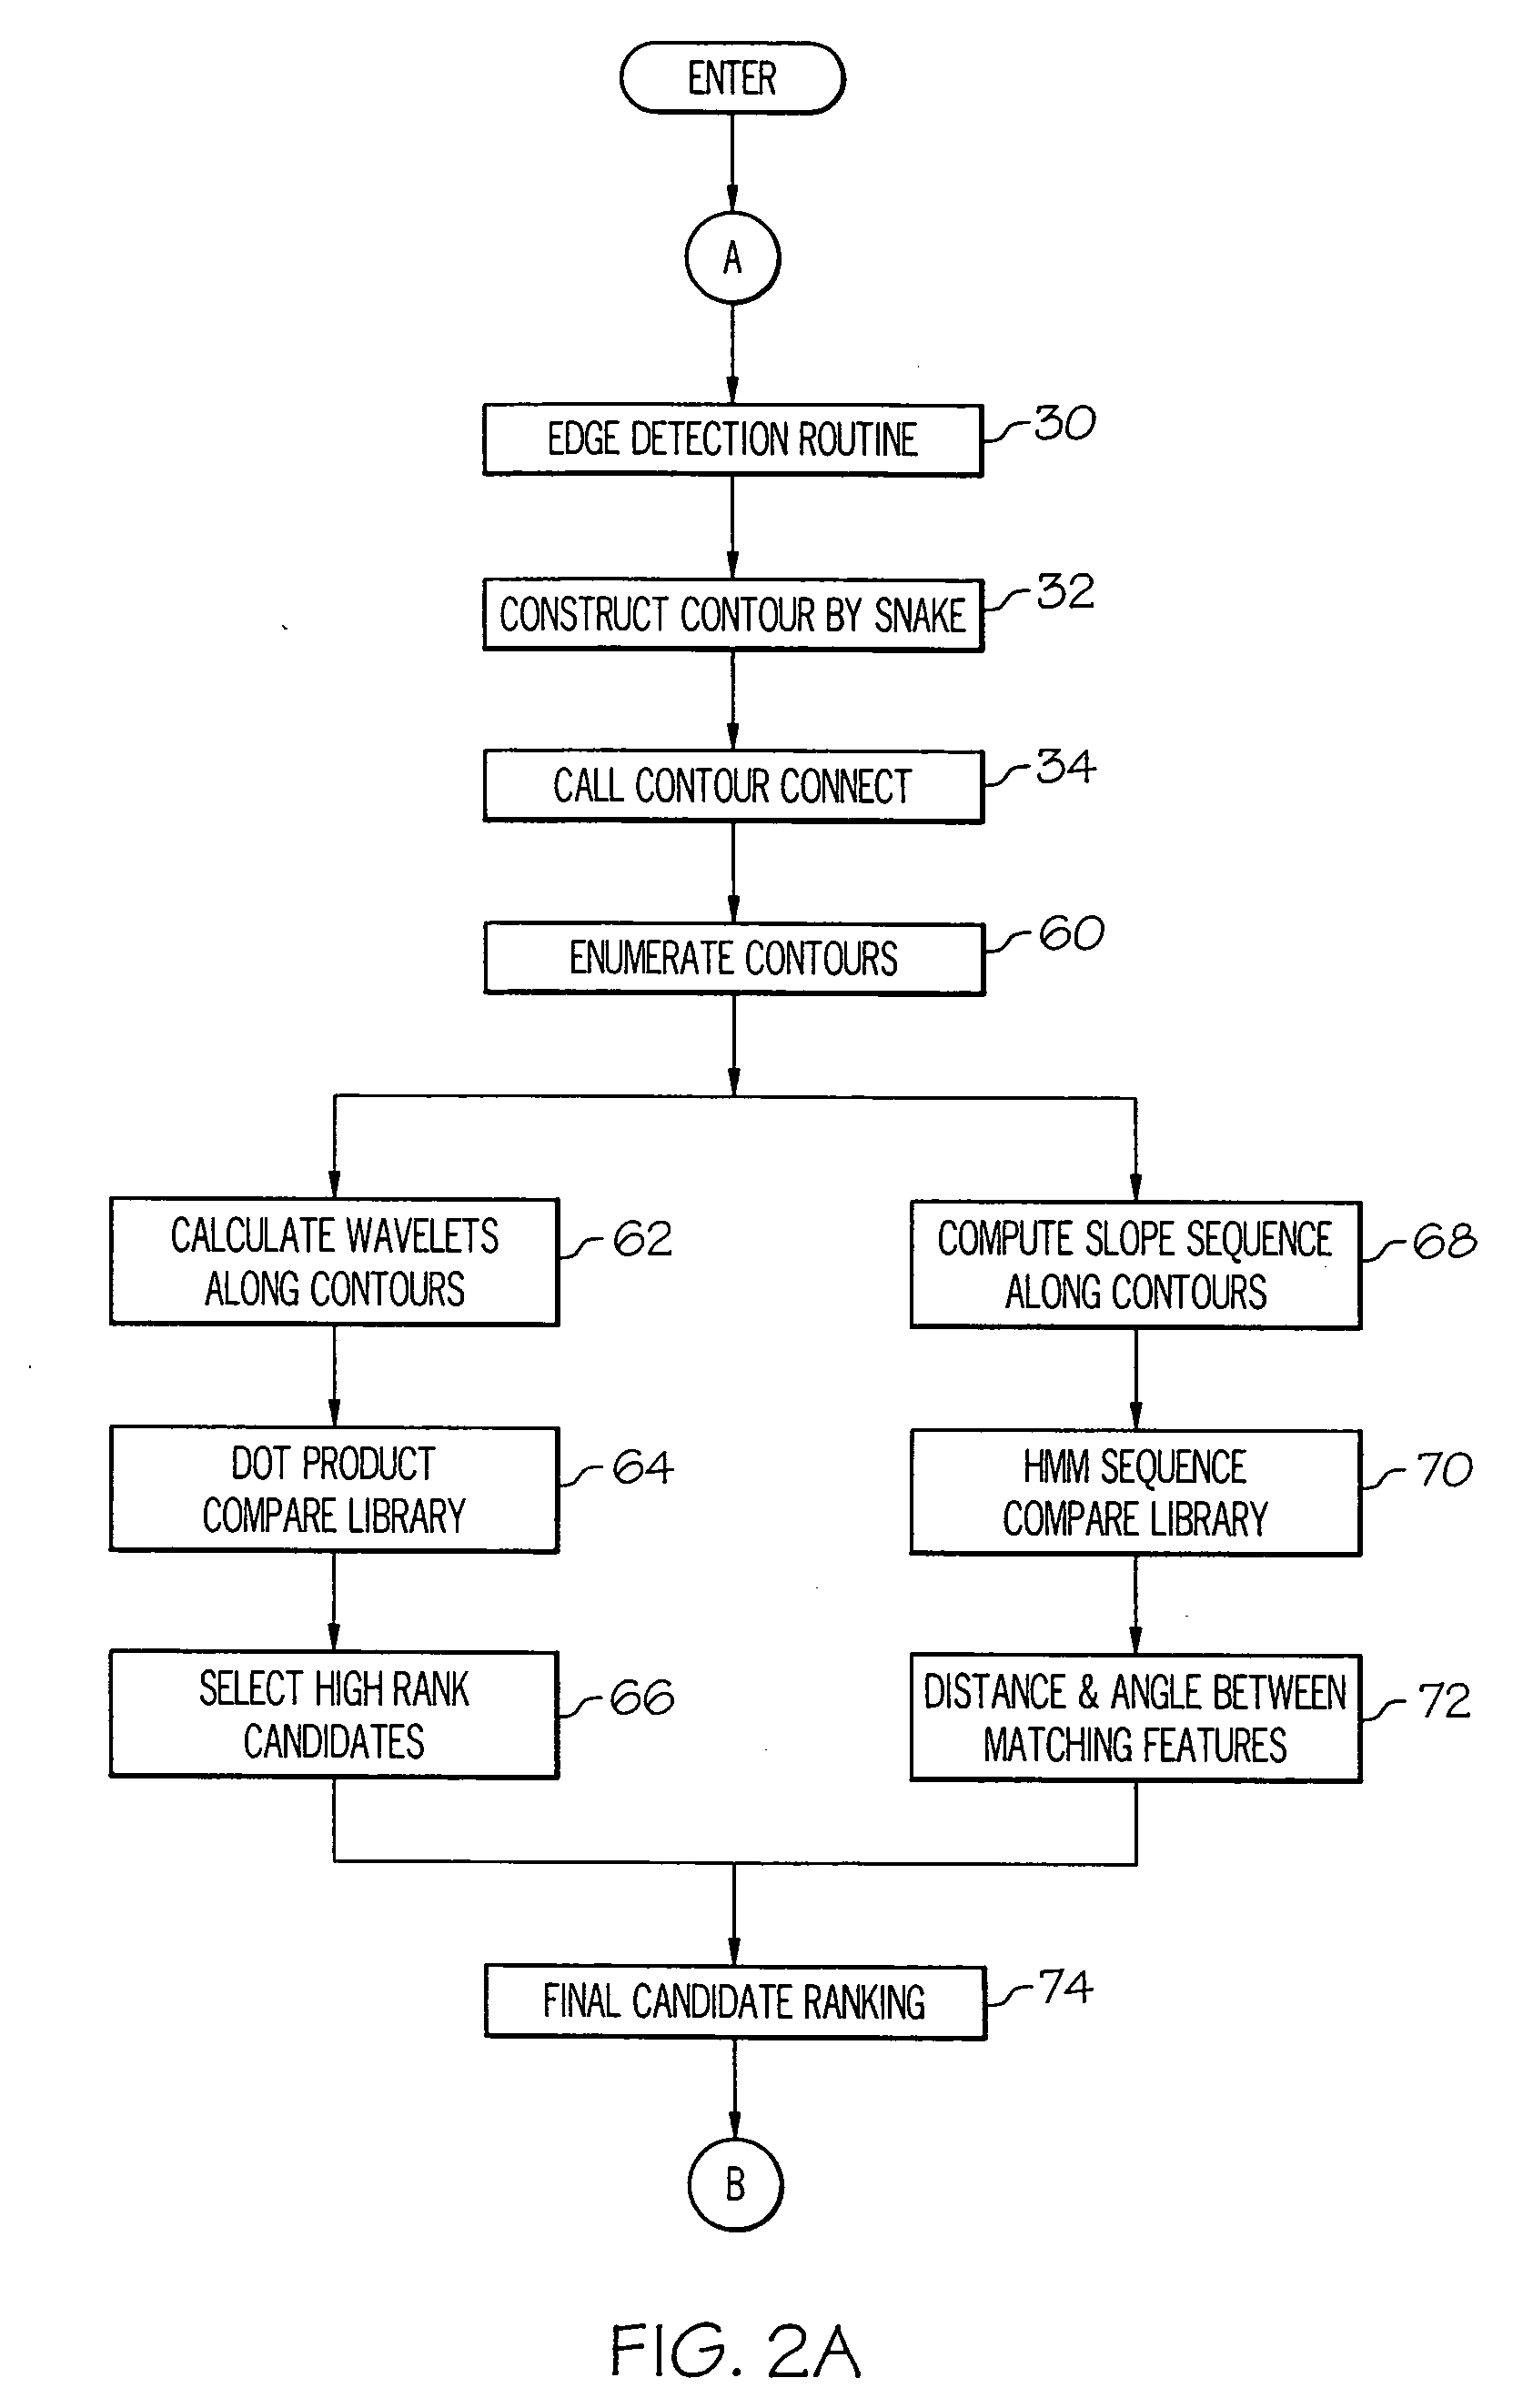 Coutour-based object recognition method for a monocular vision system